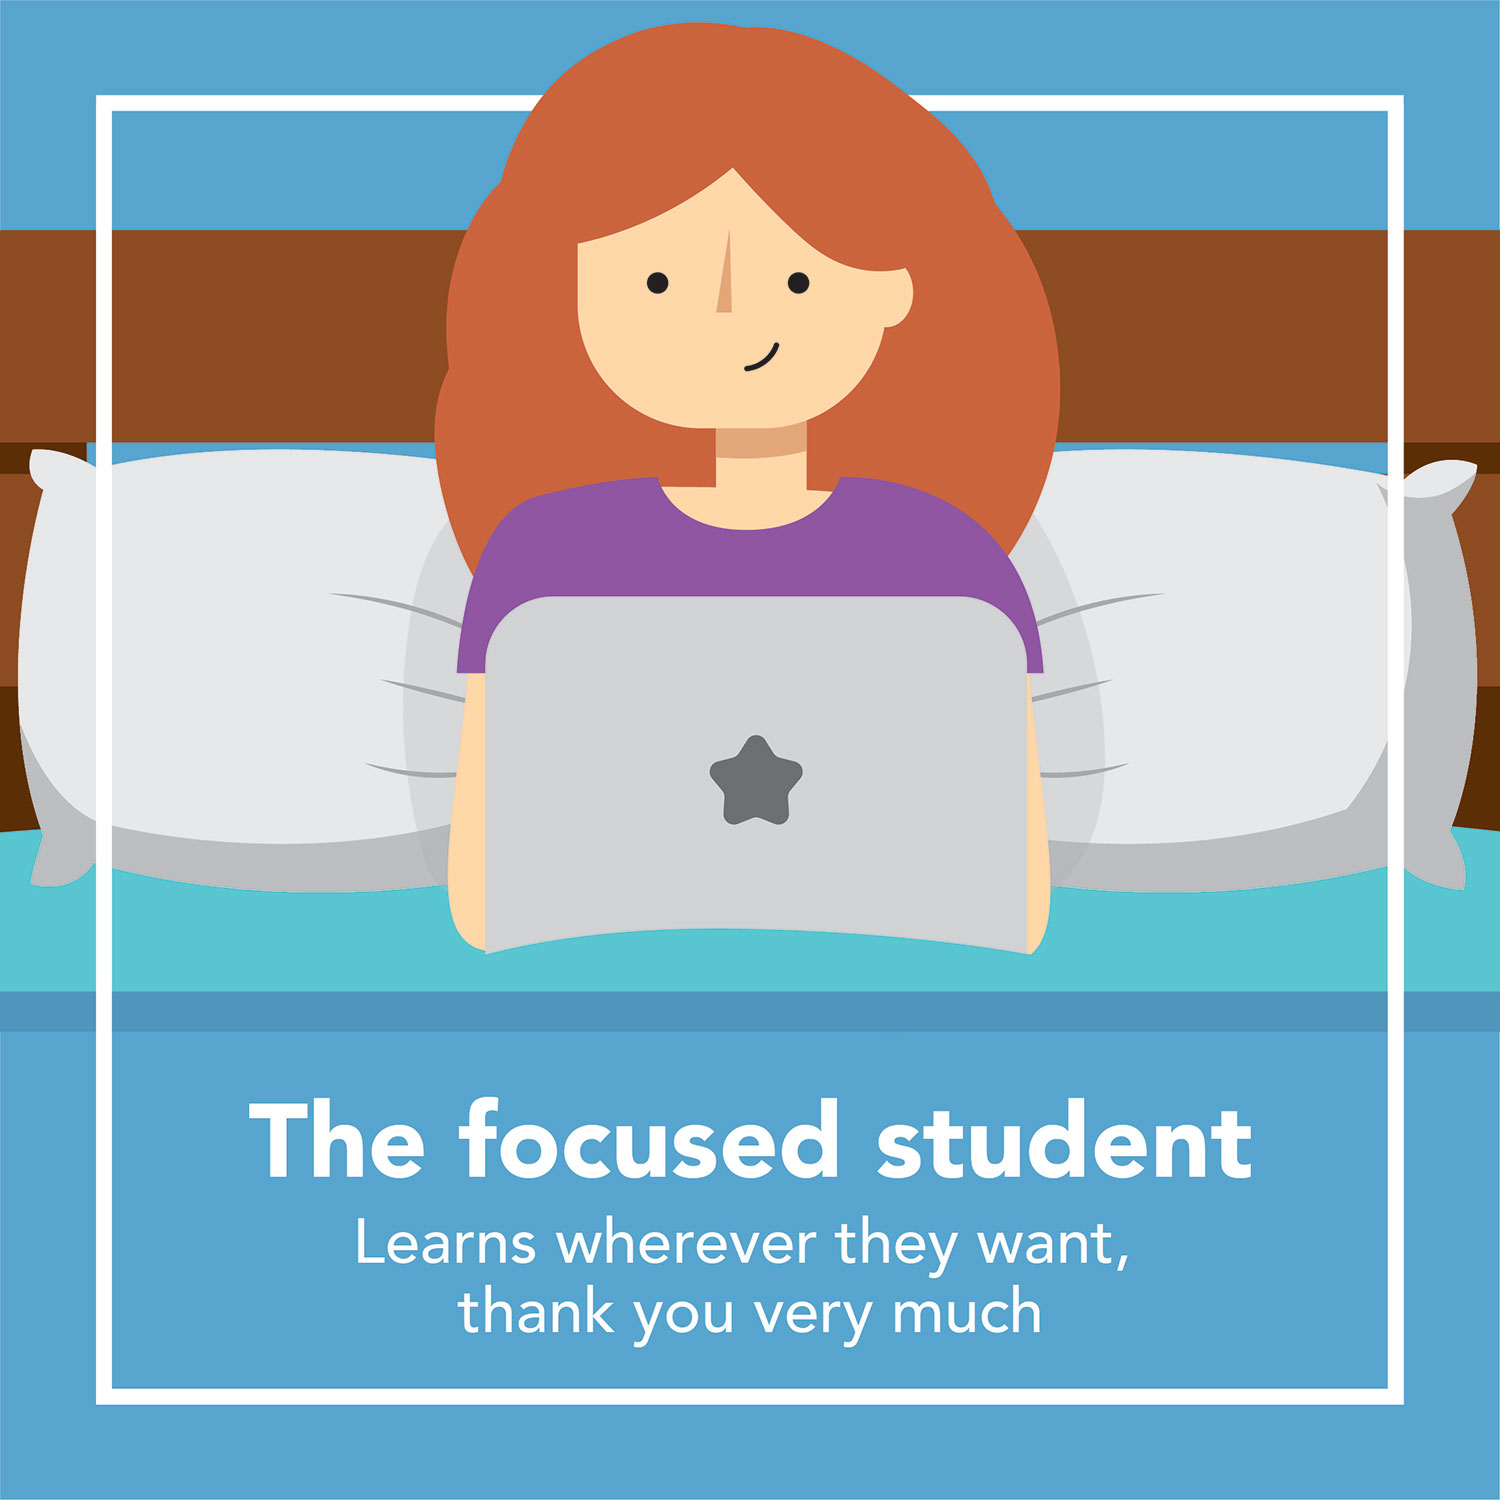 the focused student - learn wherever they want thank you very much